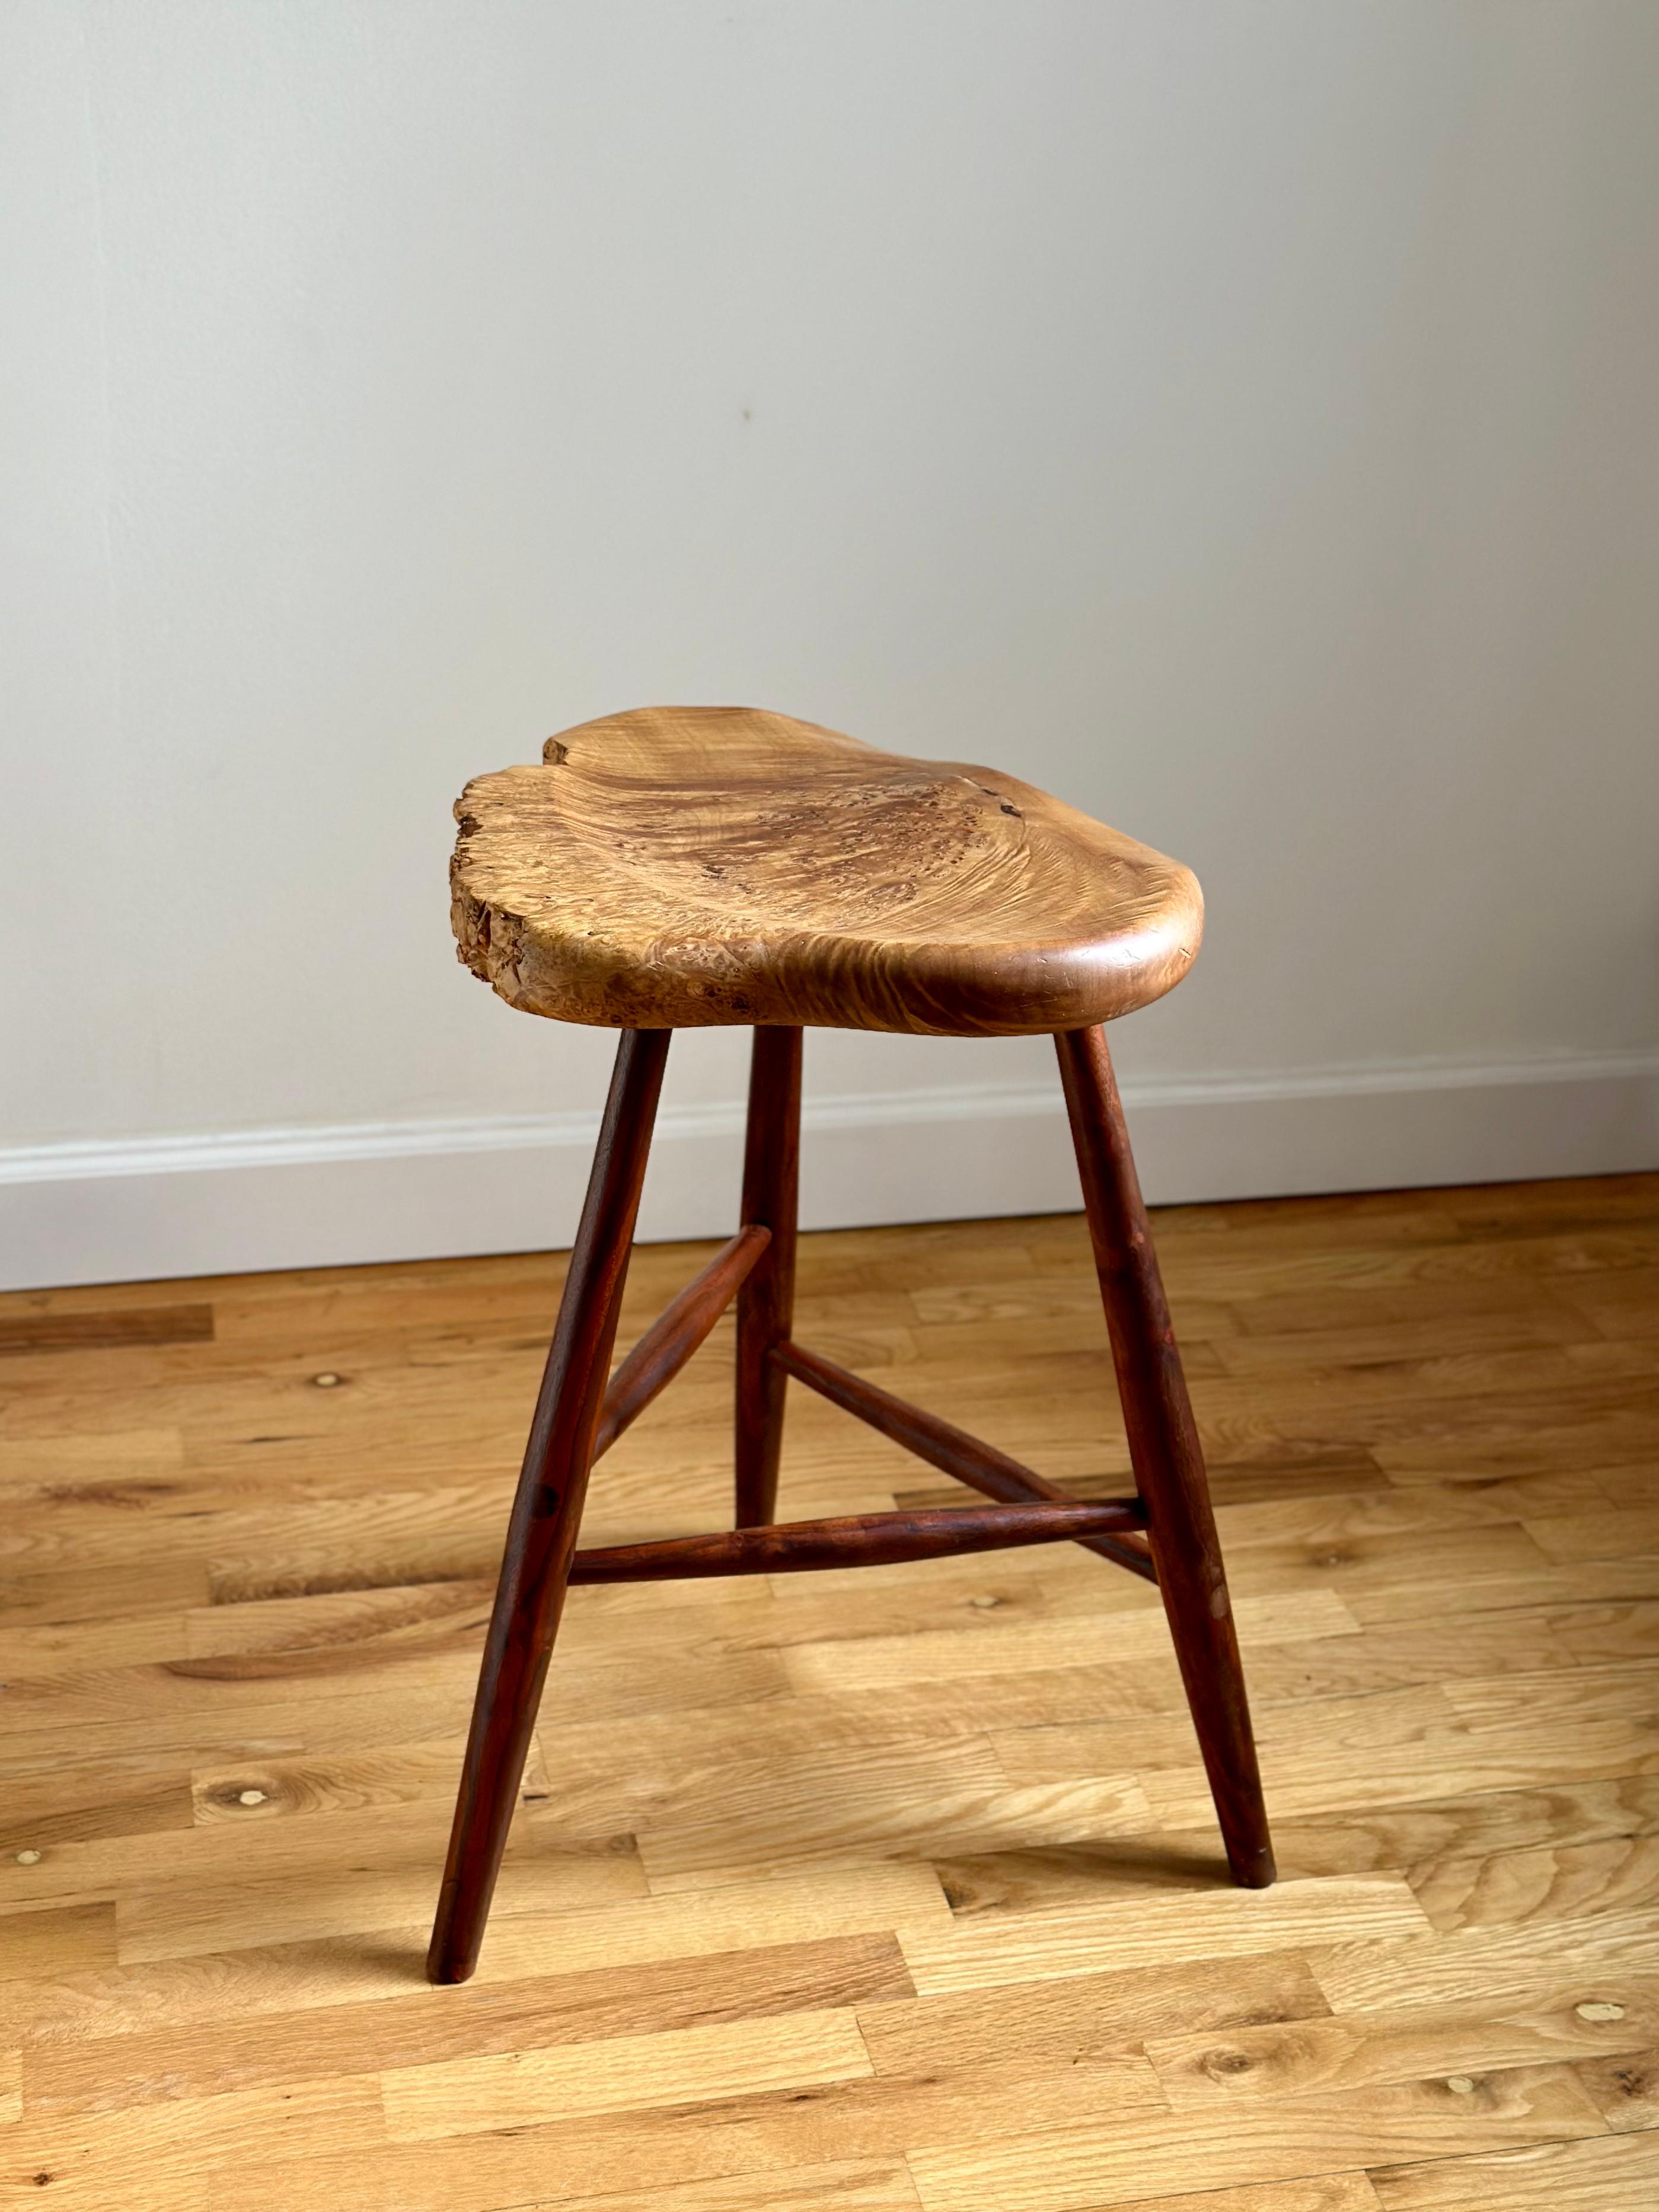 A counter-height stool executed in American black walnut and with a sculptural, free edge seat in maple burl by Oregon-based craftsman, Michael Elkan. Walnut has a warm, reddish hue and beautiful figure, providing striking contrast against the seat.